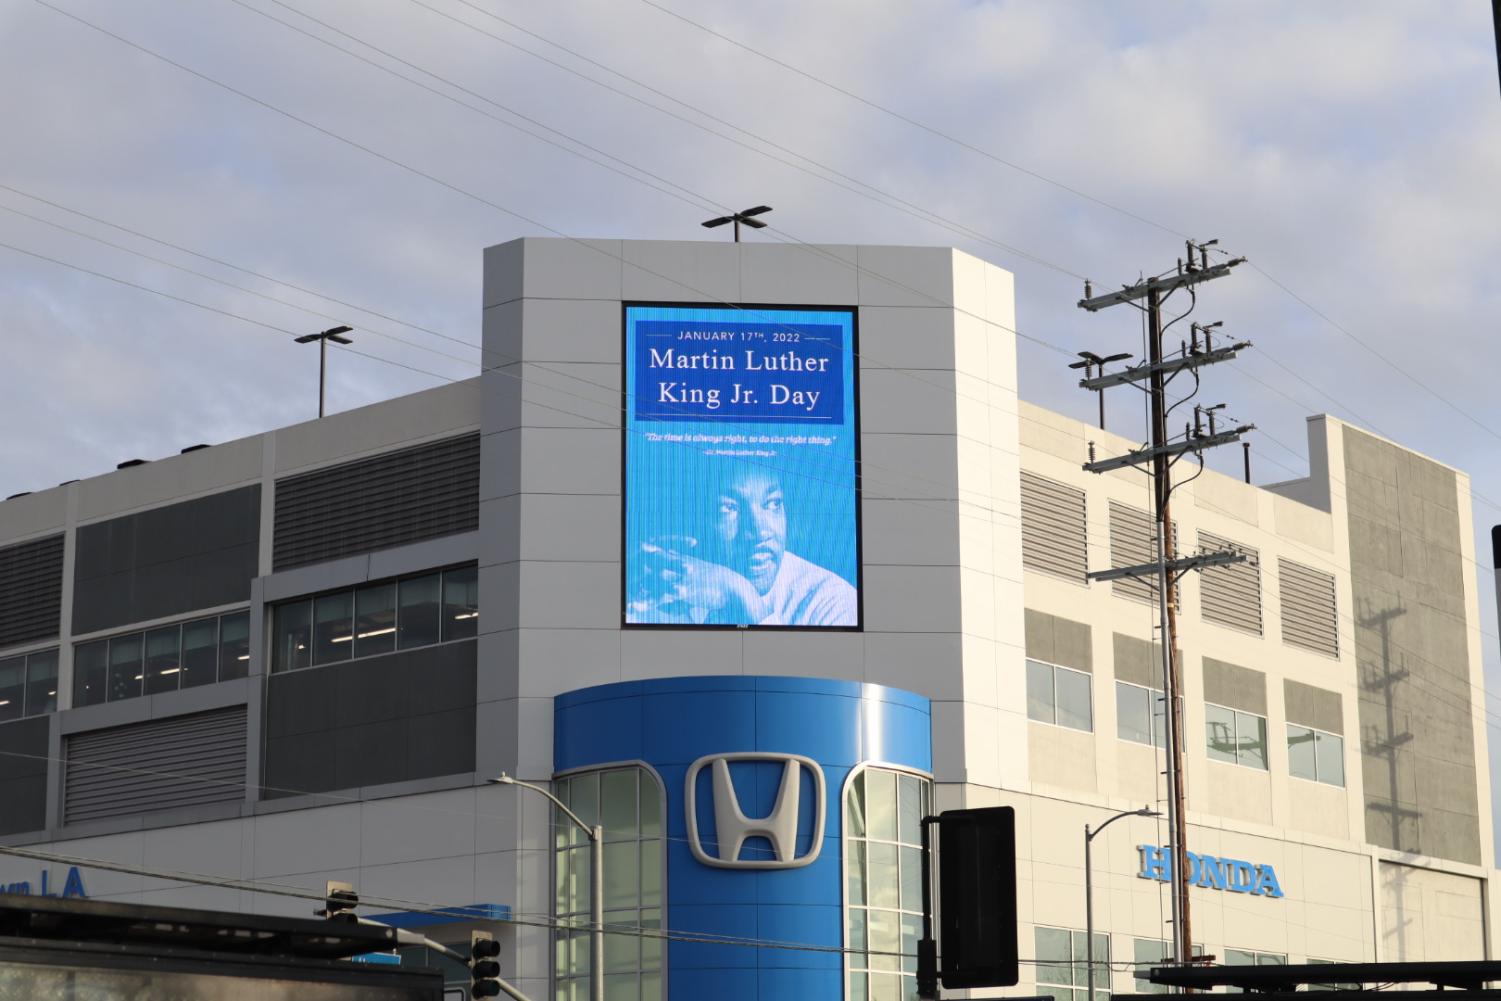 A virtual sign commemorates Martin Luther King Jr. Day on King Boulevard in Los Angeles, CA on Jan. 16, 2022. The sign contains a well known quote from King: "The time is always right, to do the right thing."